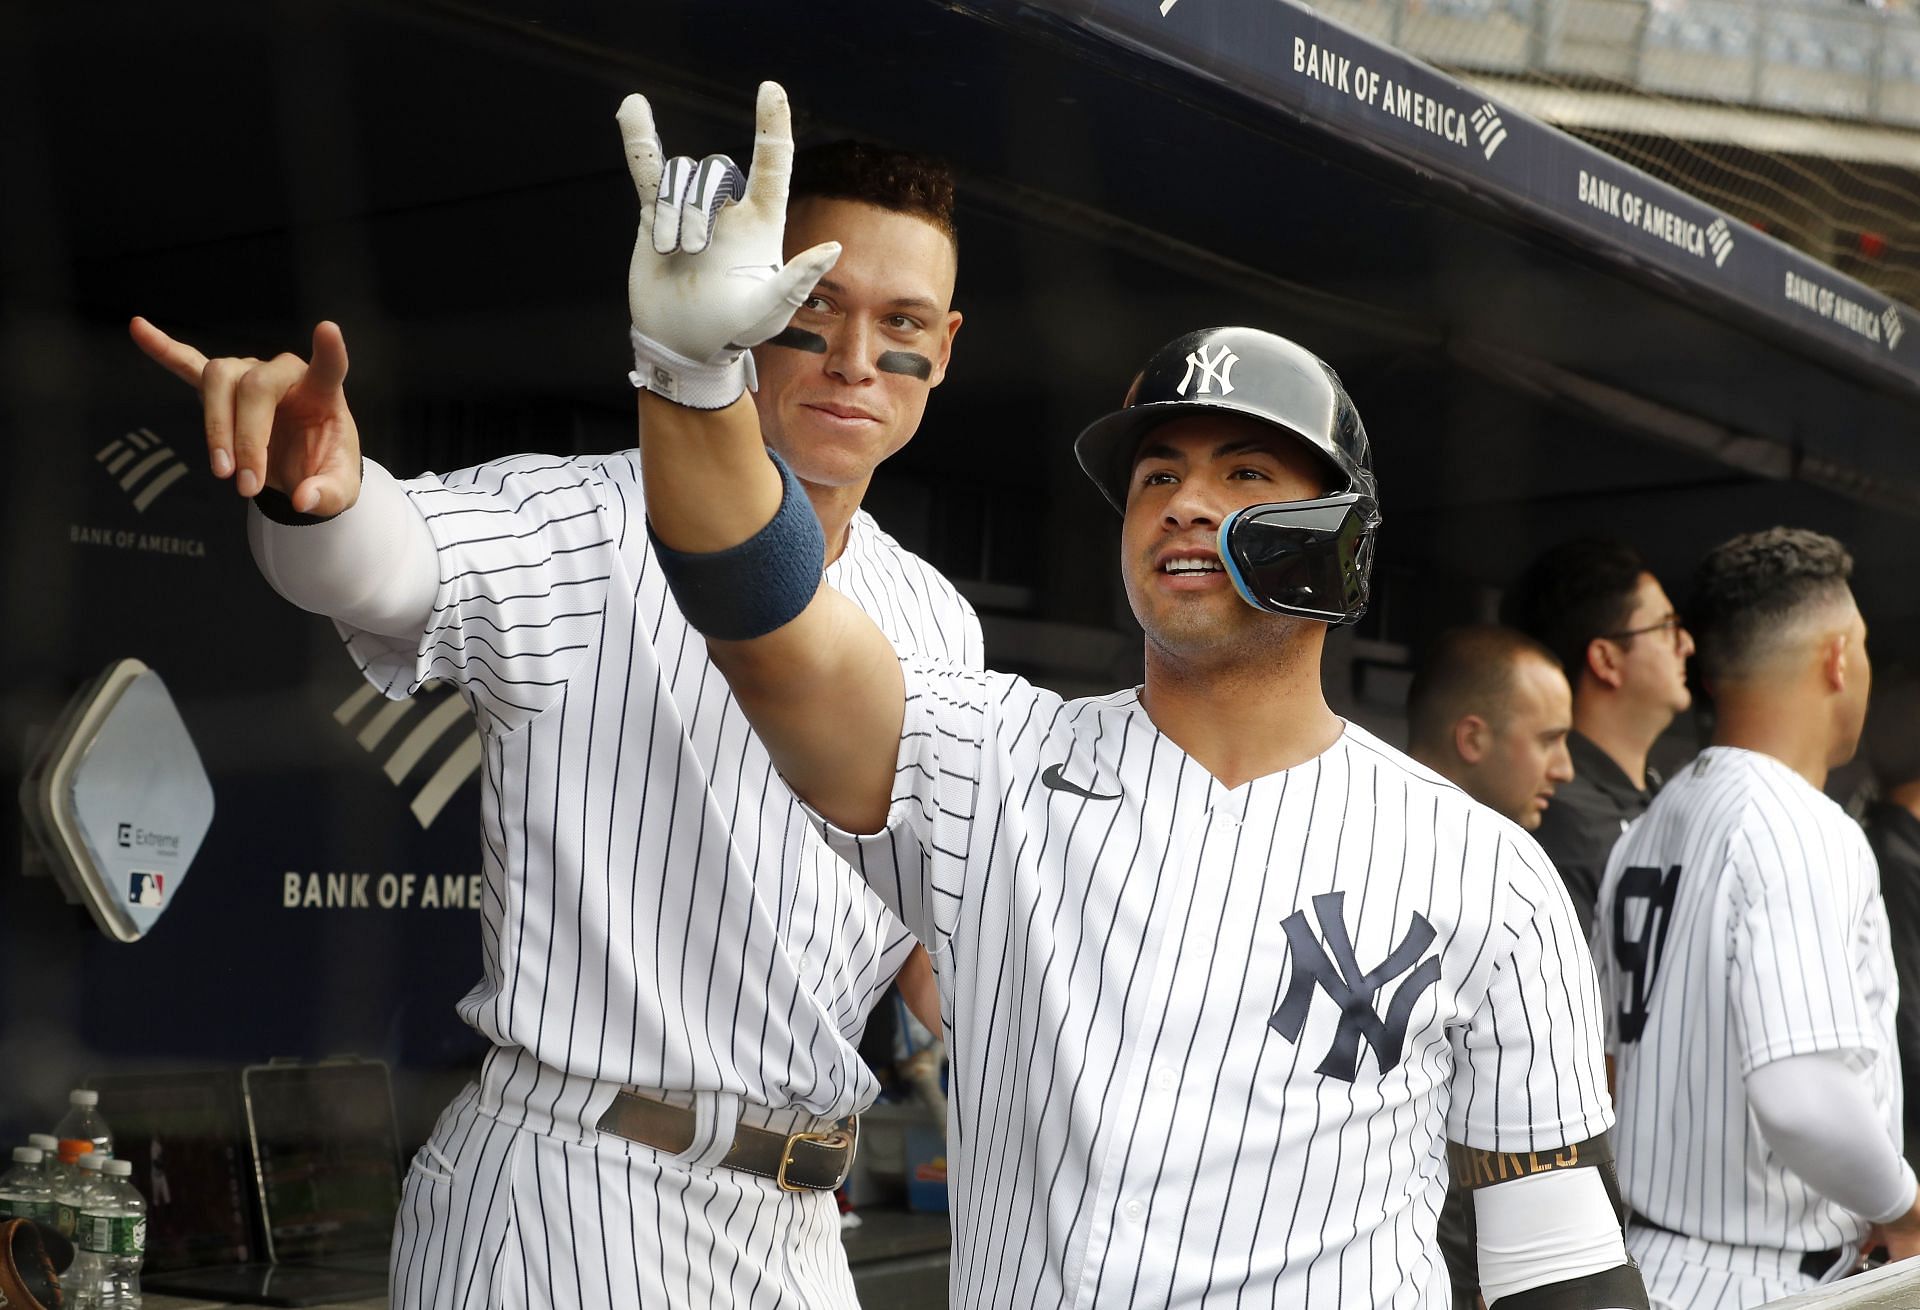 Where in the world is Gleyber Torres?